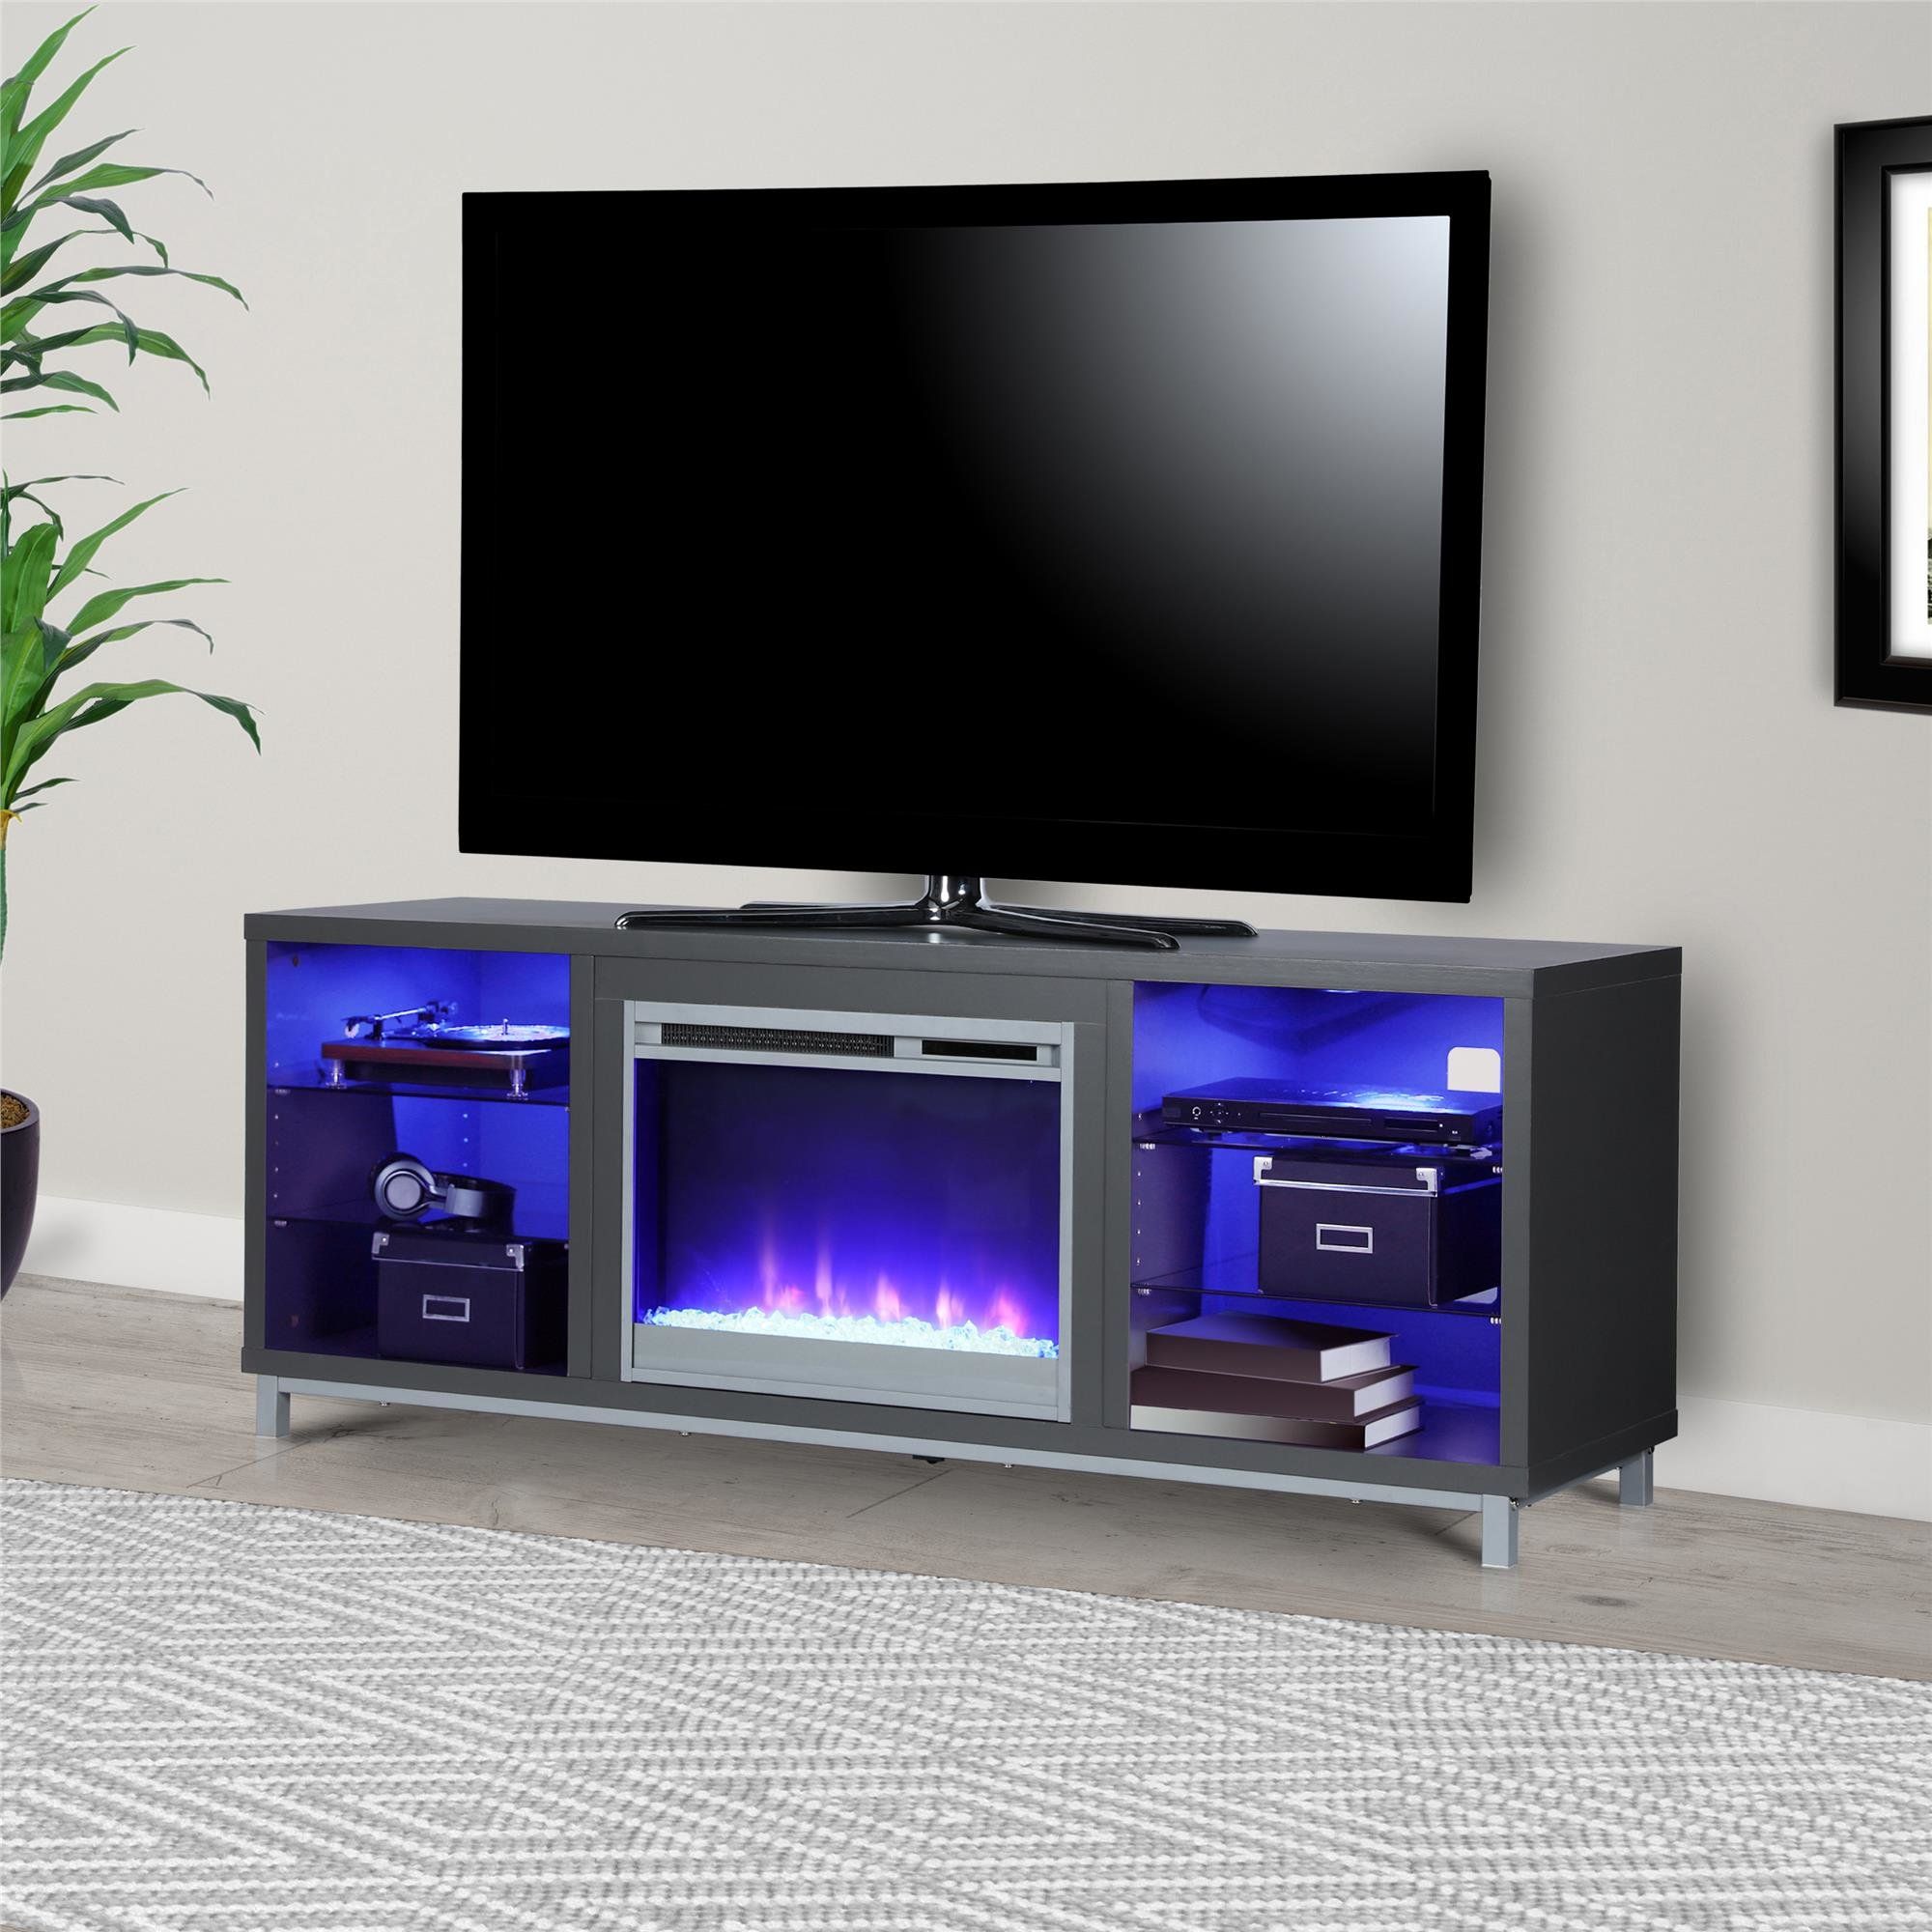 Fireplace Tv Stands & Entertainment Centers You'll Love | Wayfair (View 18 of 30)